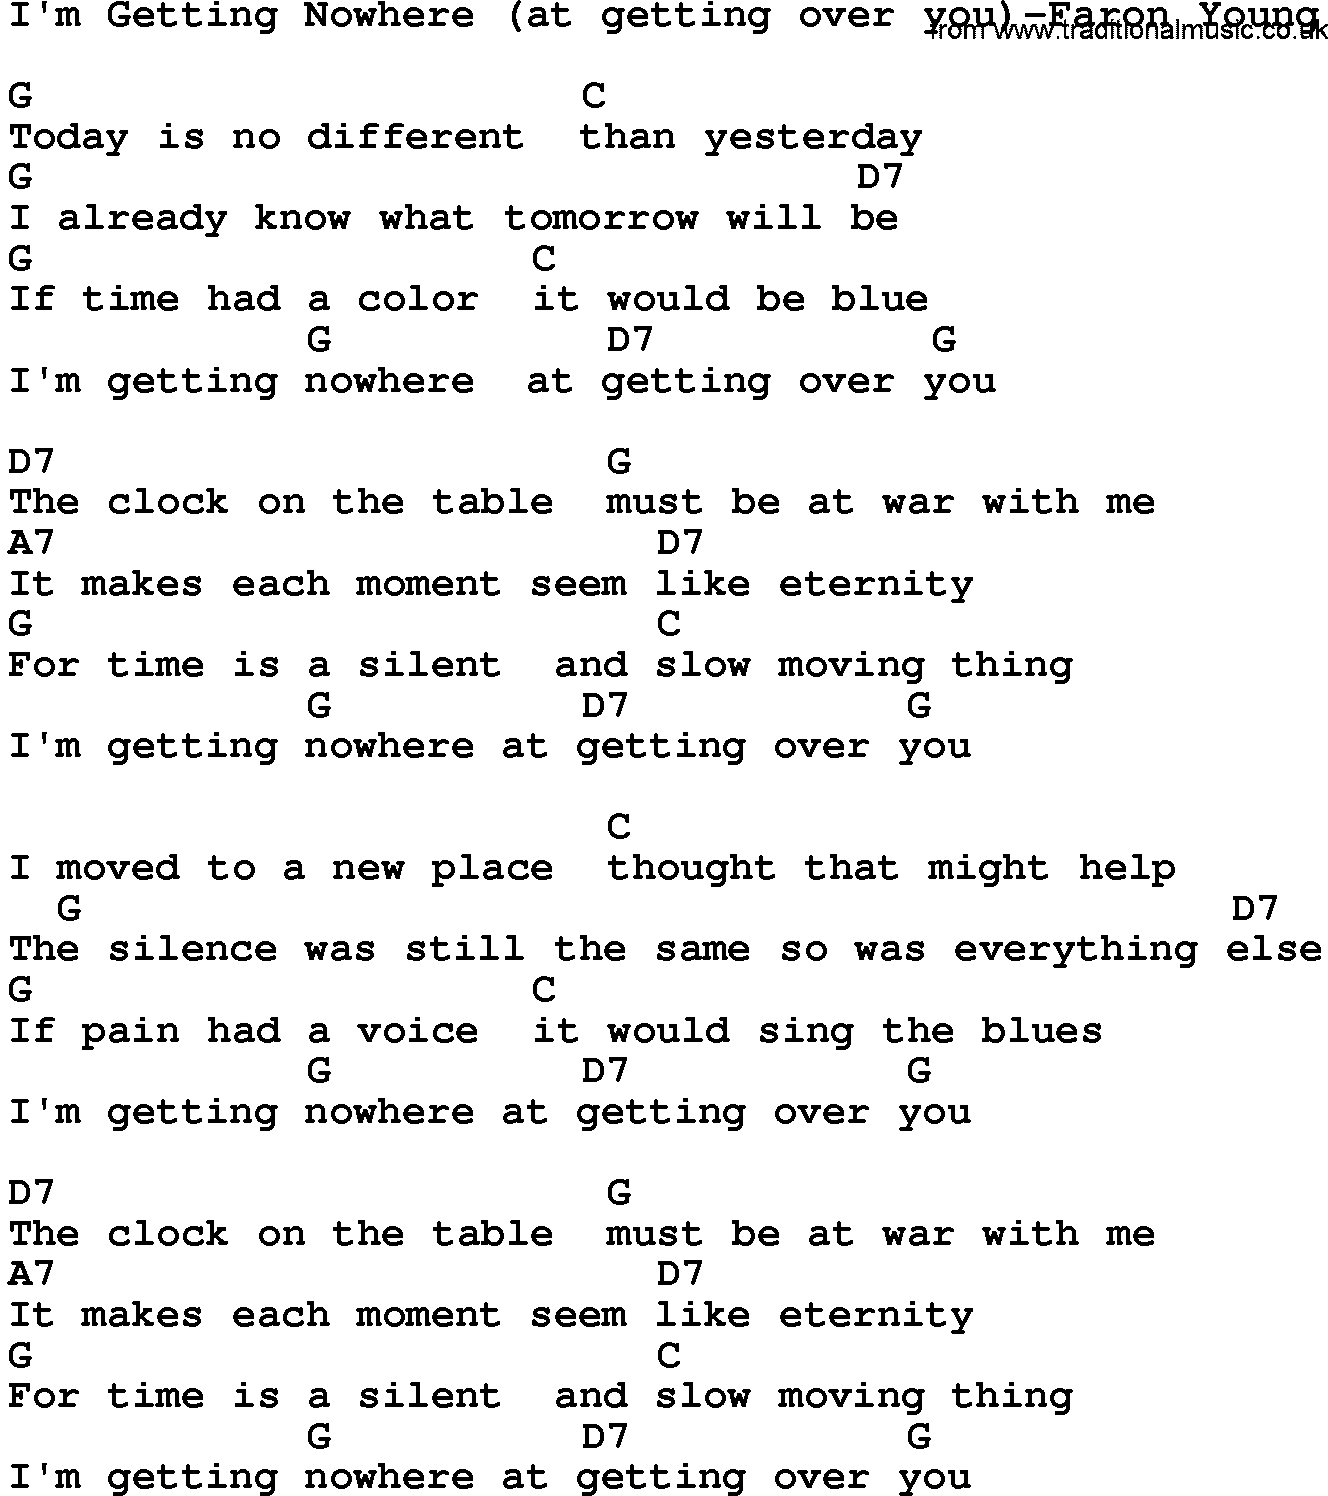 Country music song: I'm Getting Nowhere(At Getting Over You)-Faron Young lyrics and chords